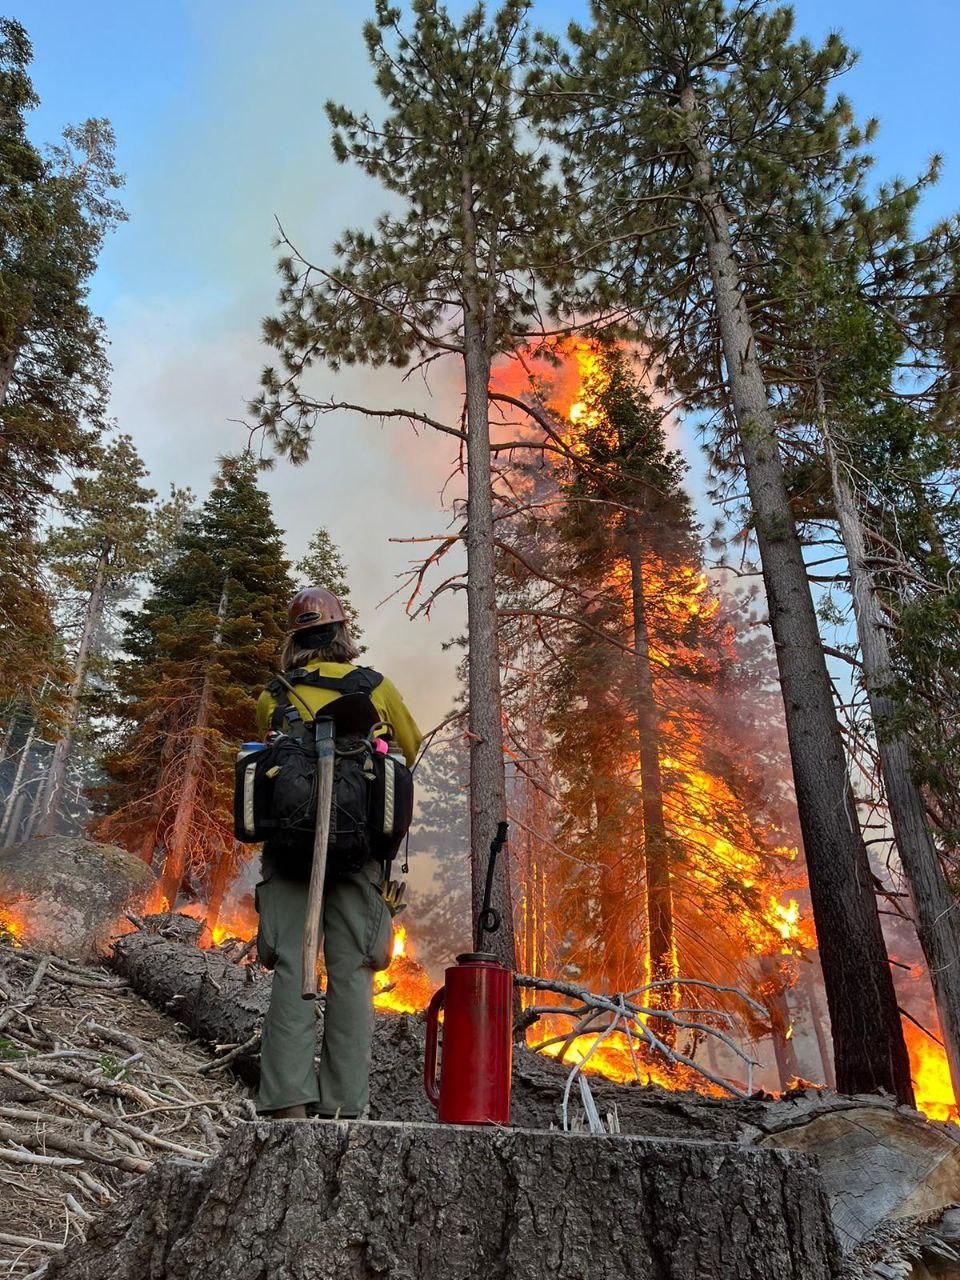 Photo of a forest with fire and smoke. There is a fighter standing in the forefront monitoring the burn